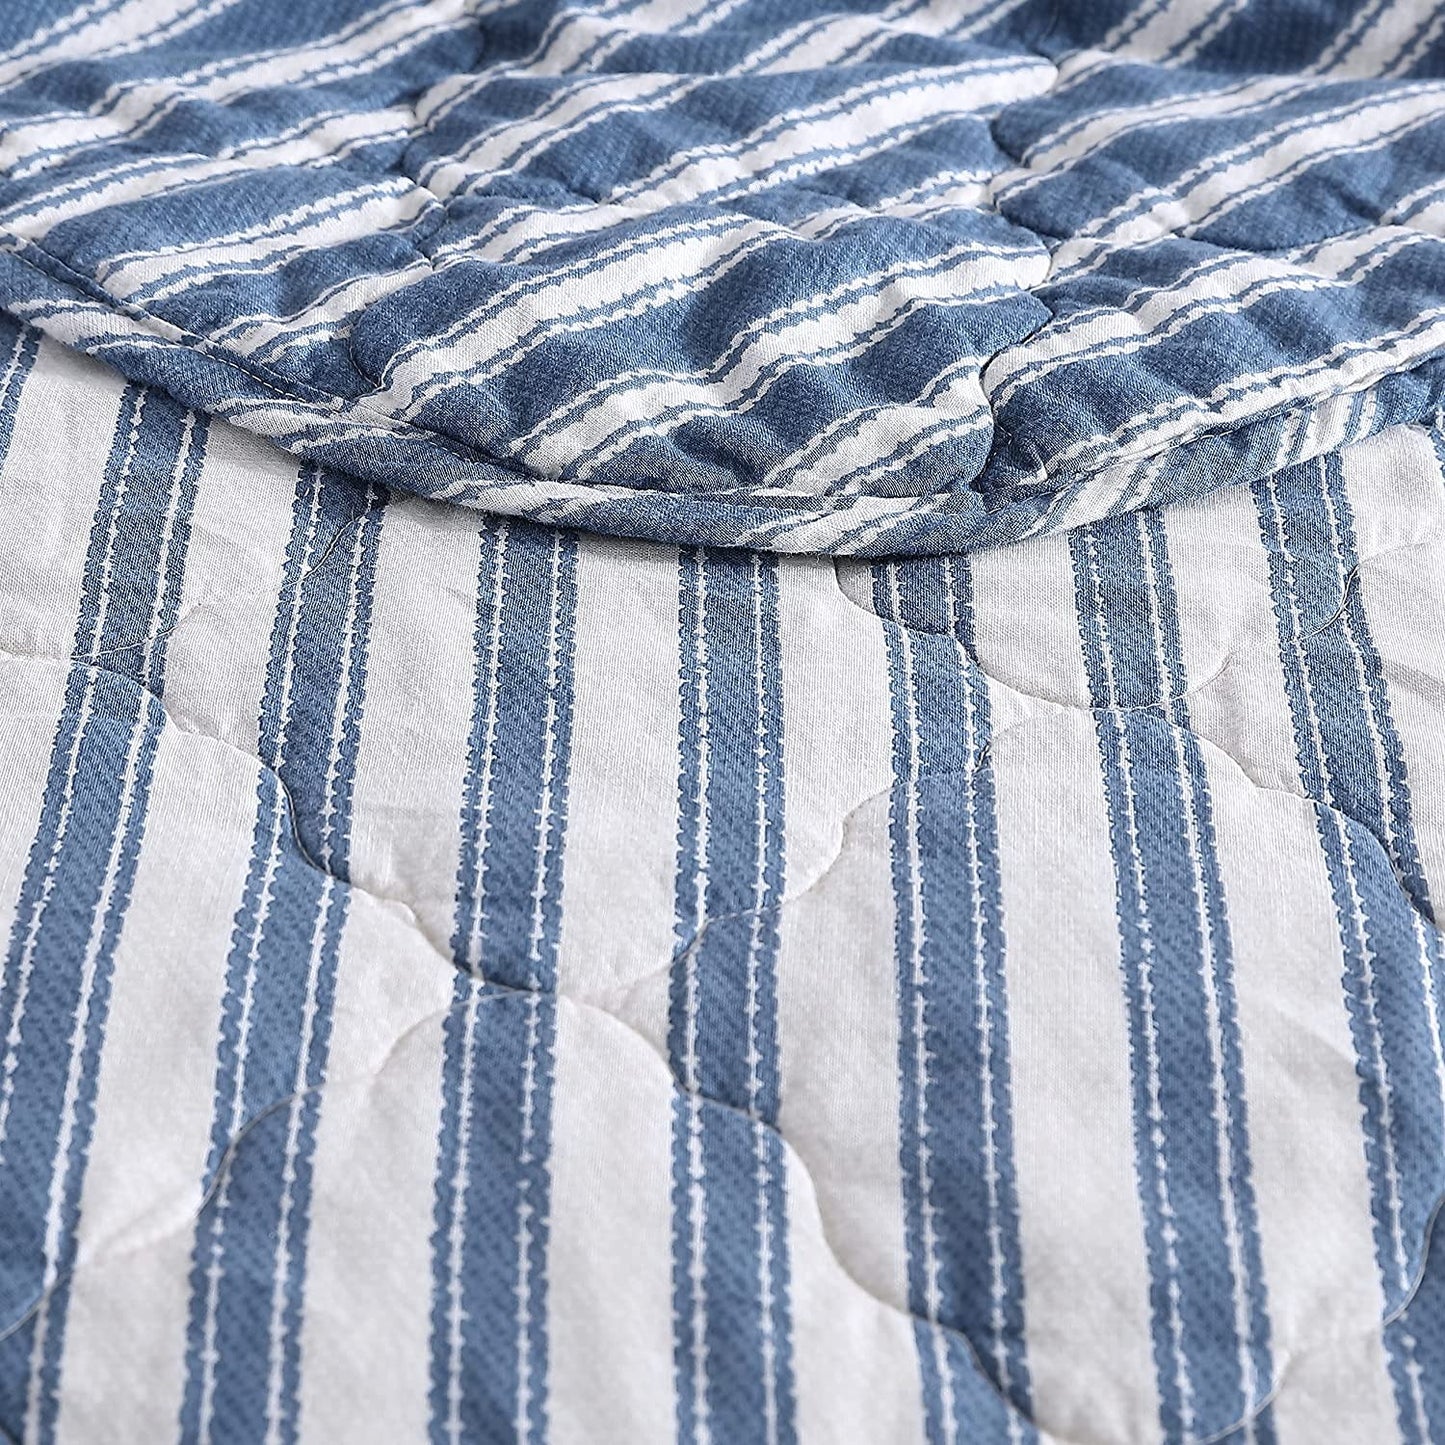 Stone Cottage | Willow Way Collection | Quilt Set-100% Cotton, Reversible, Lightweight & Breathable Bedding with Matching Shams, Pre-Washed for Added Softness, King, Indigo